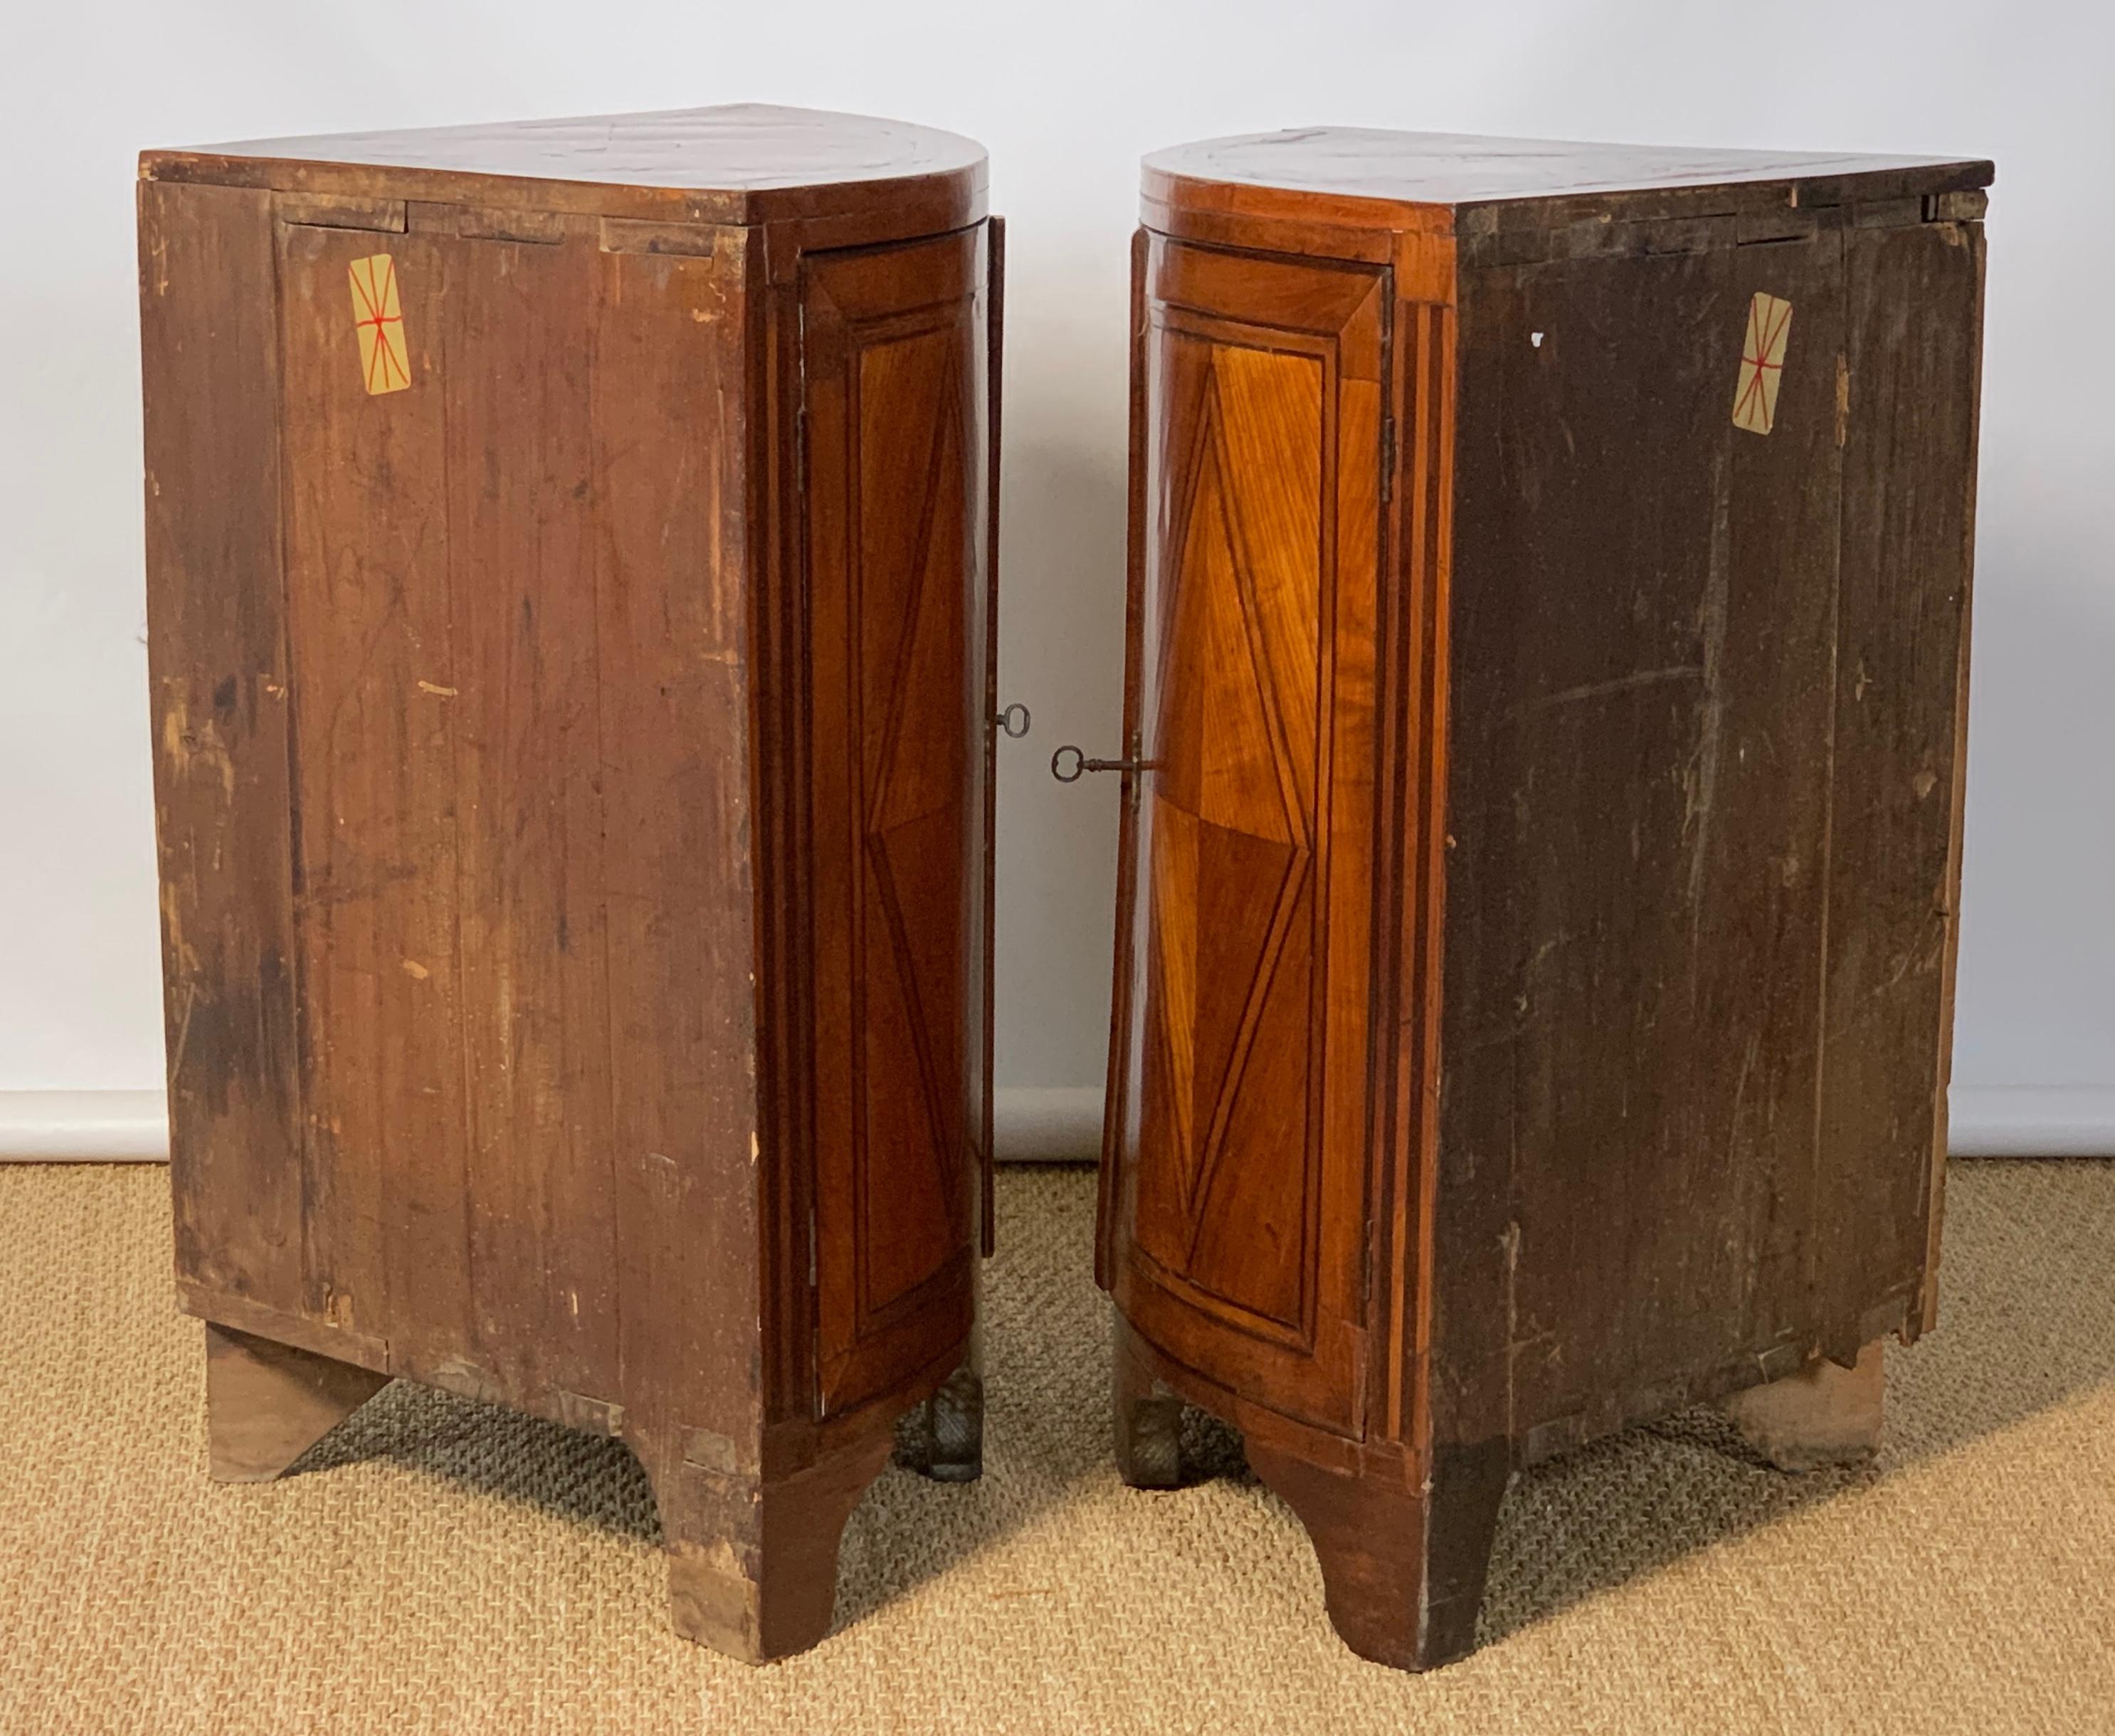 Hand-Carved Pair of Late 18th Century French Encoigneurs 'Corner Cabinets'